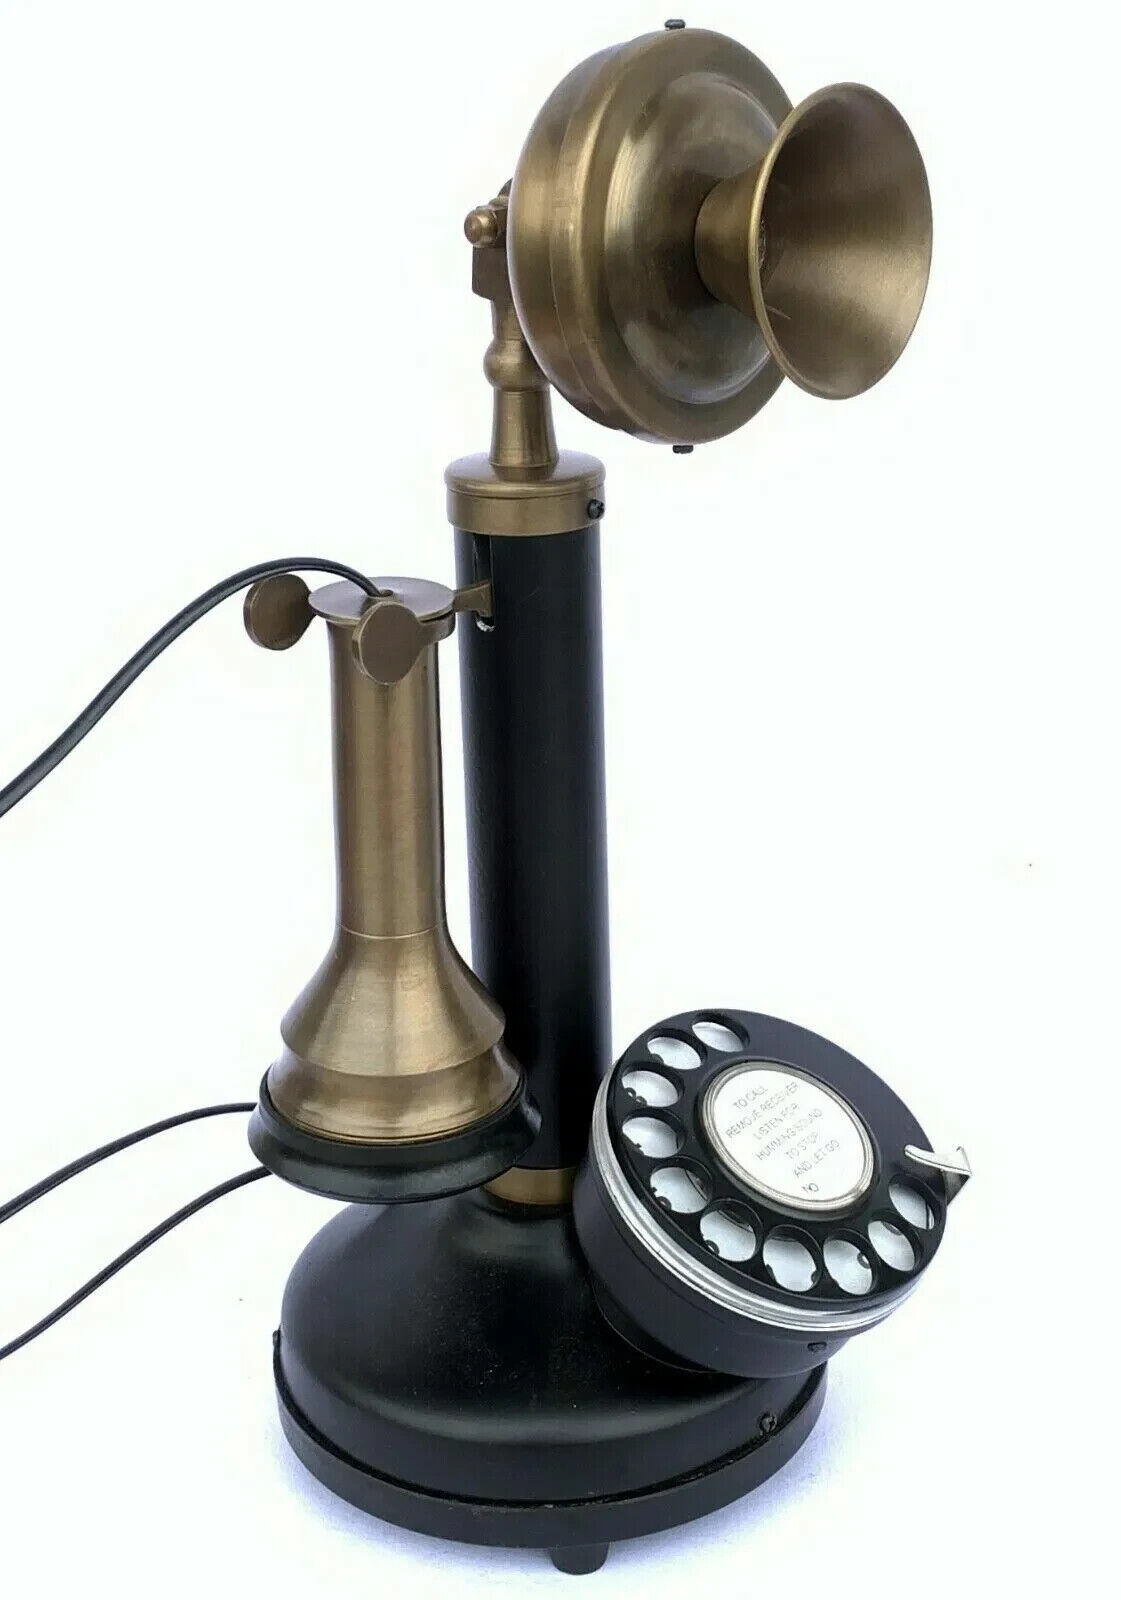 Antique Replica Vintage Style Rotary Dial Candlestick Working Desk Telephone